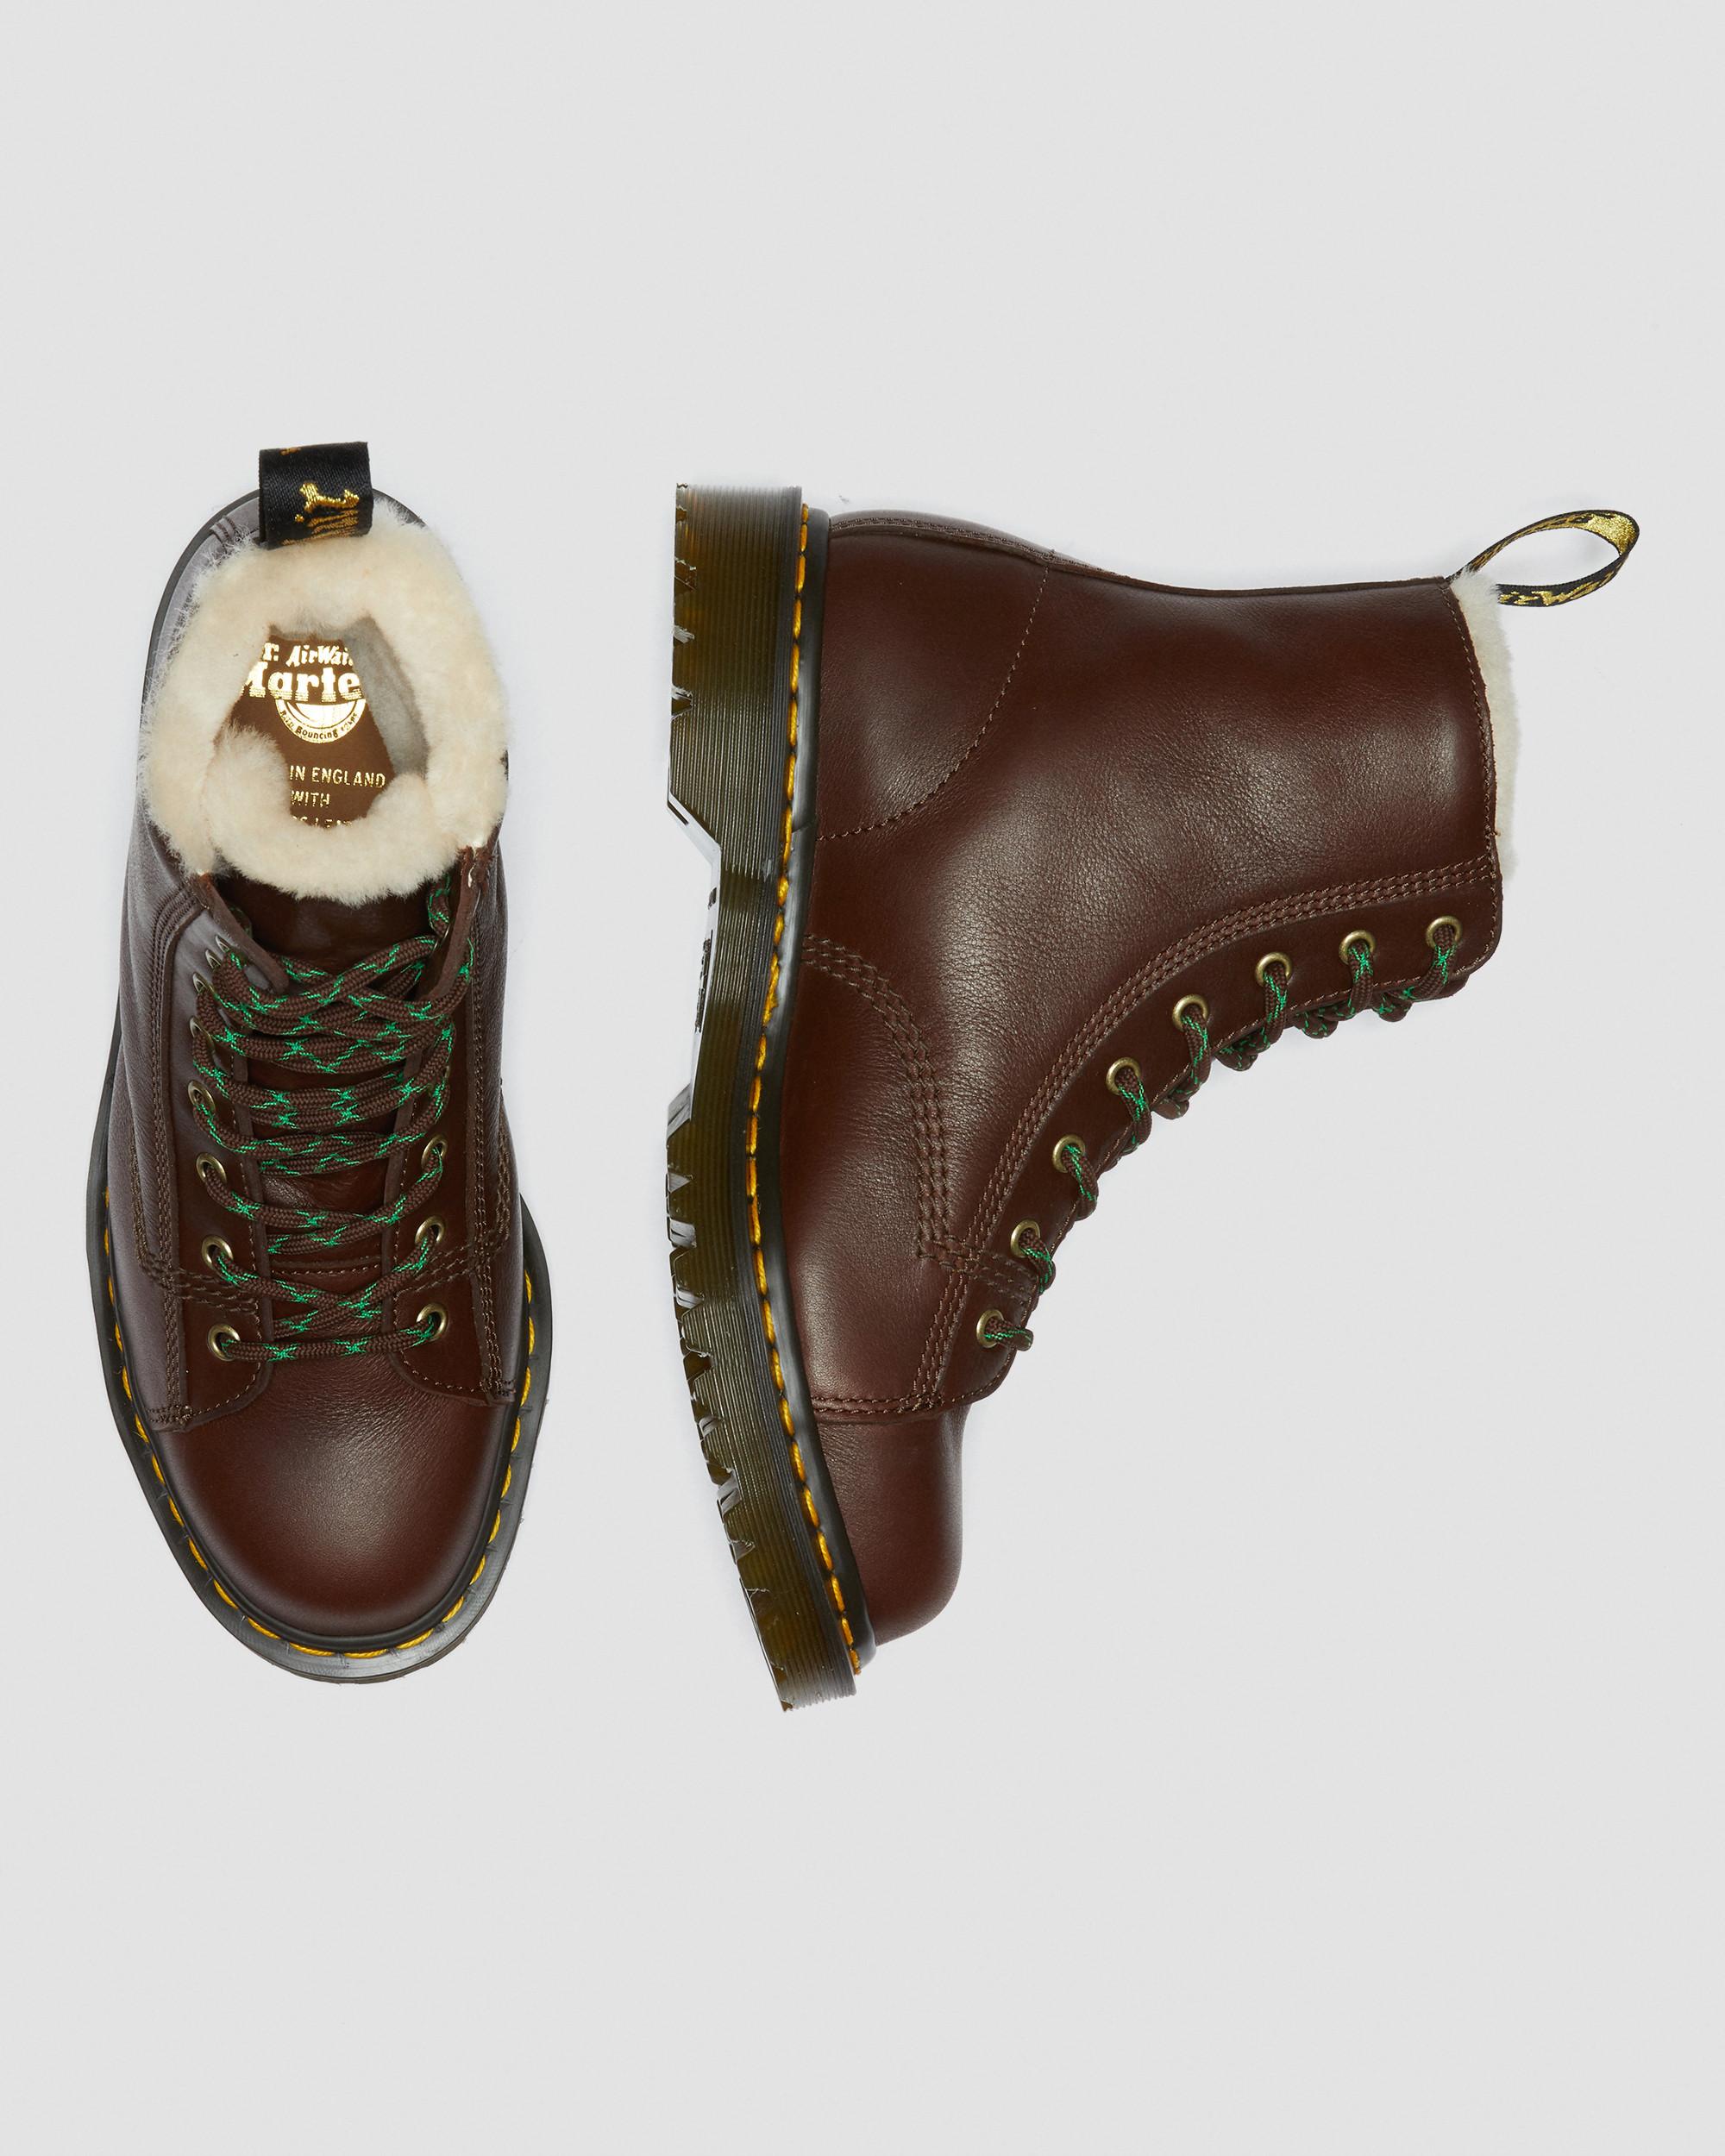 Barton Shearling Lined Brown Leather Ankle BootsStivaletti Di Pelle Barton Foderati In Shearling Dr. Martens